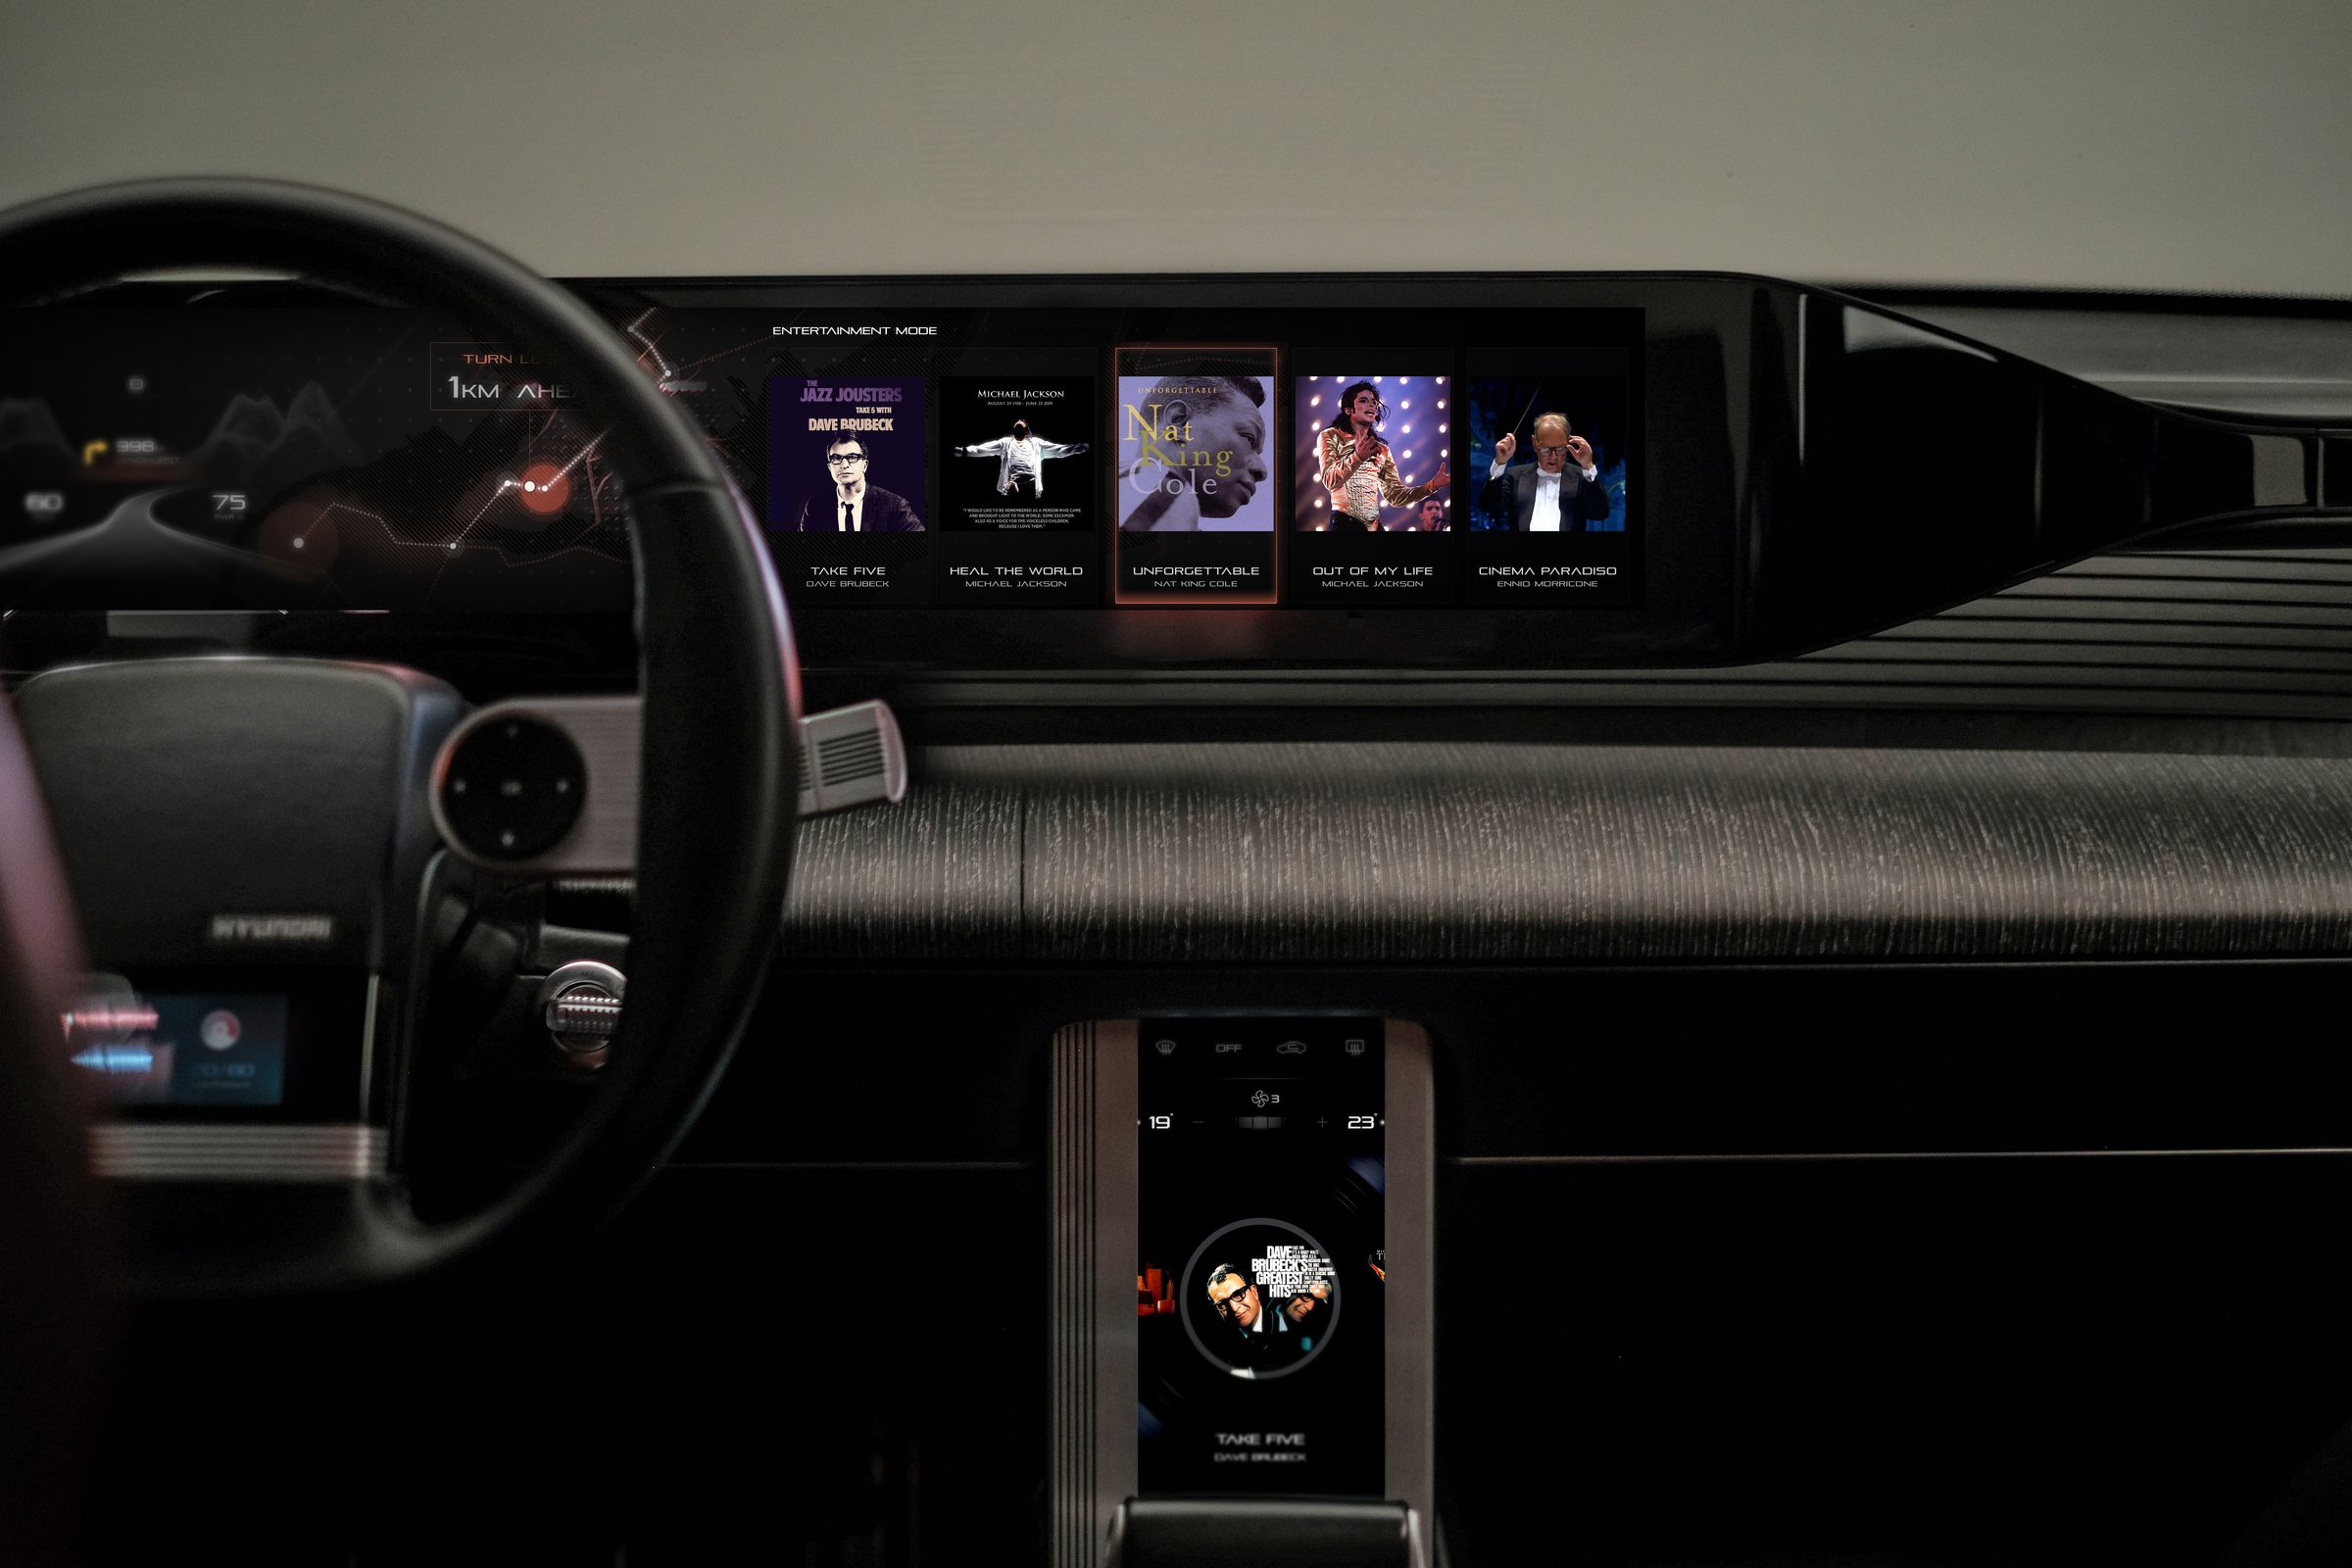 The infotainment system, which you could use to queue up your playlist that just loops The Weeknd’s “Heartless” and “Faith.”